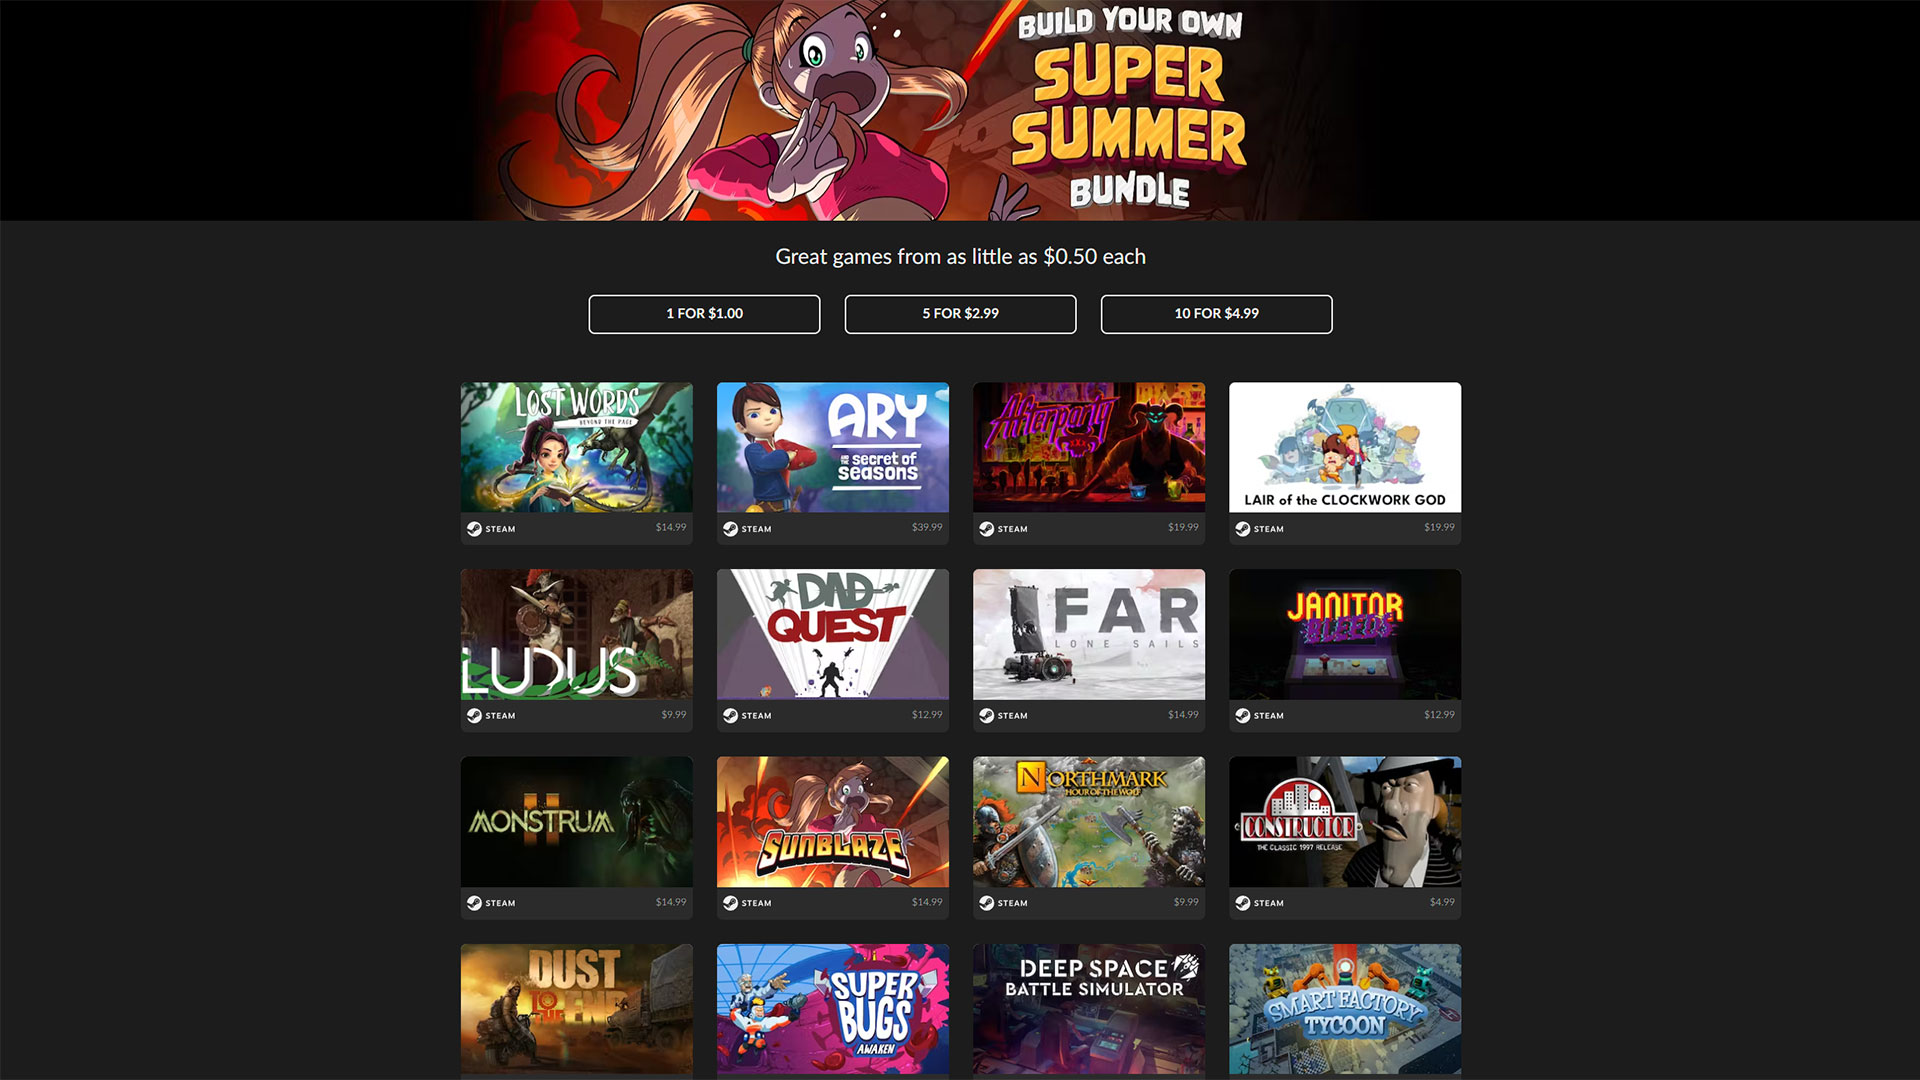 Fanatical's Build Your Own Super Summer Bundle gets you 10 games for $4.99